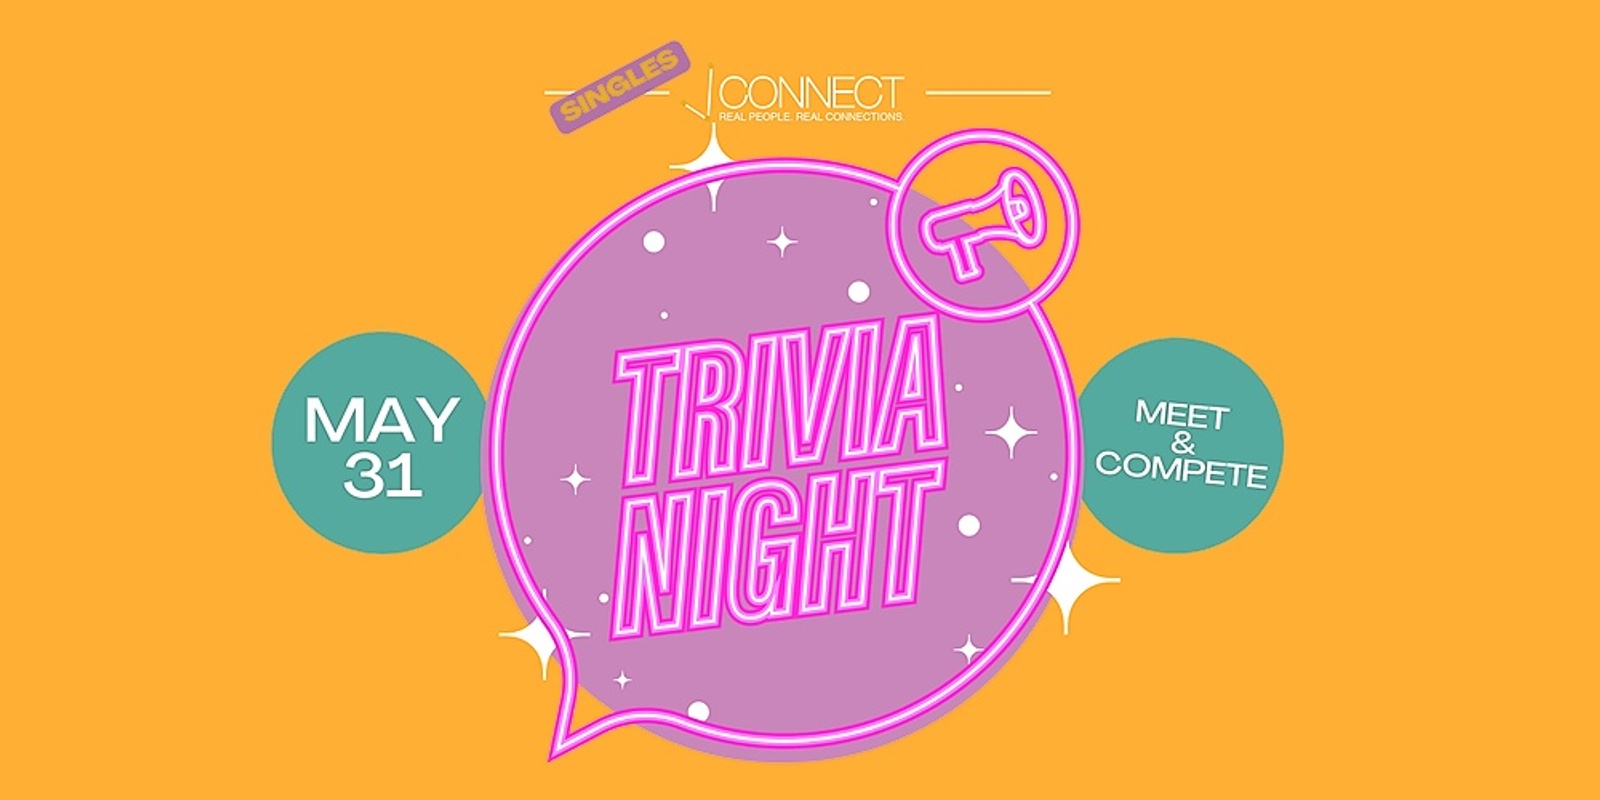 Banner image for Jconnect Trivia Night